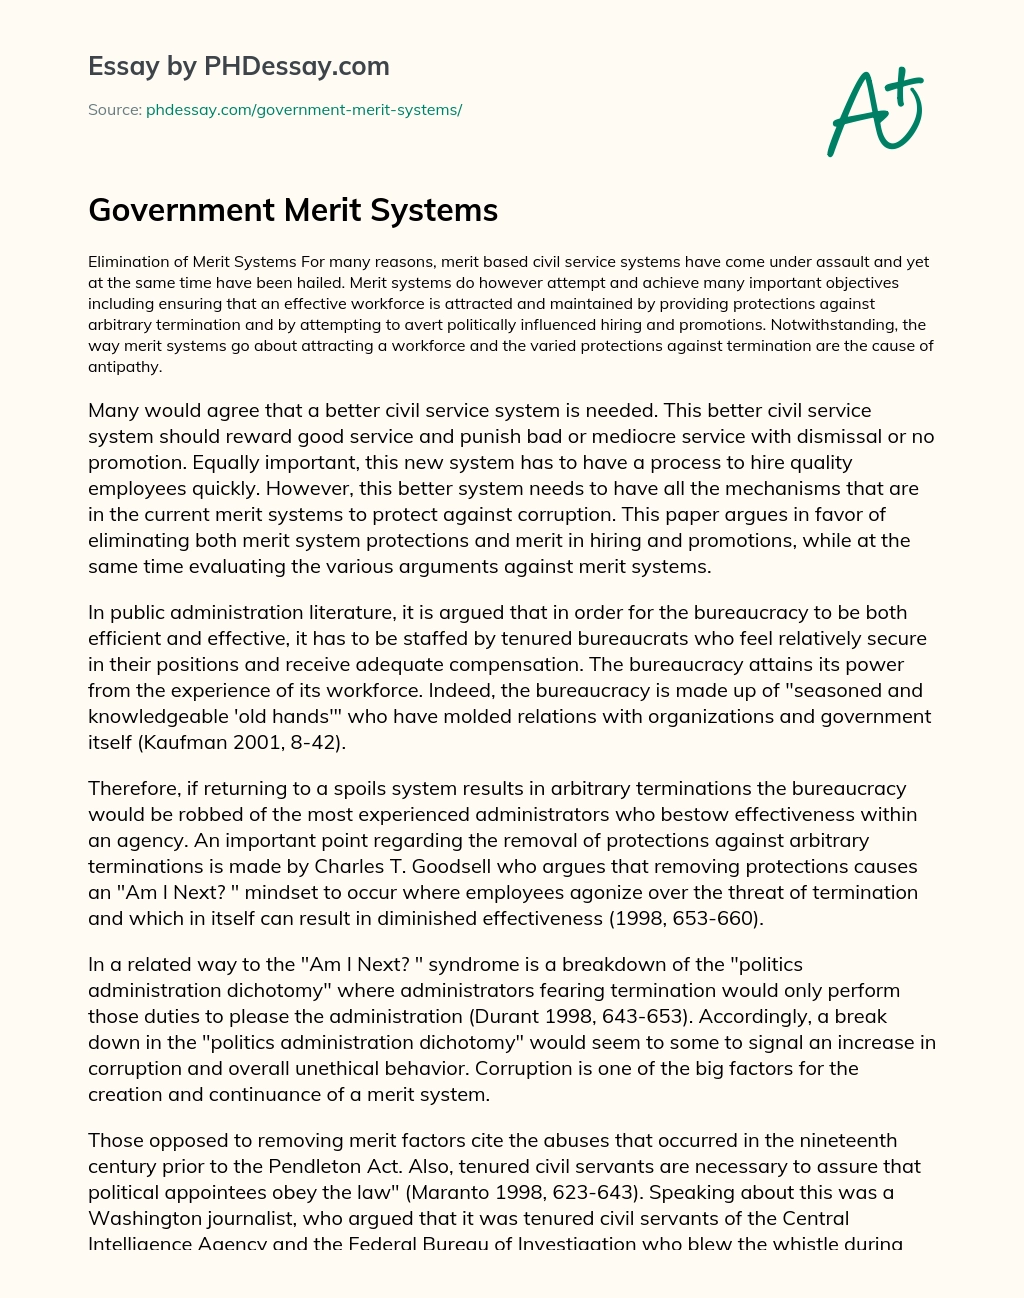 Government Merit Systems essay